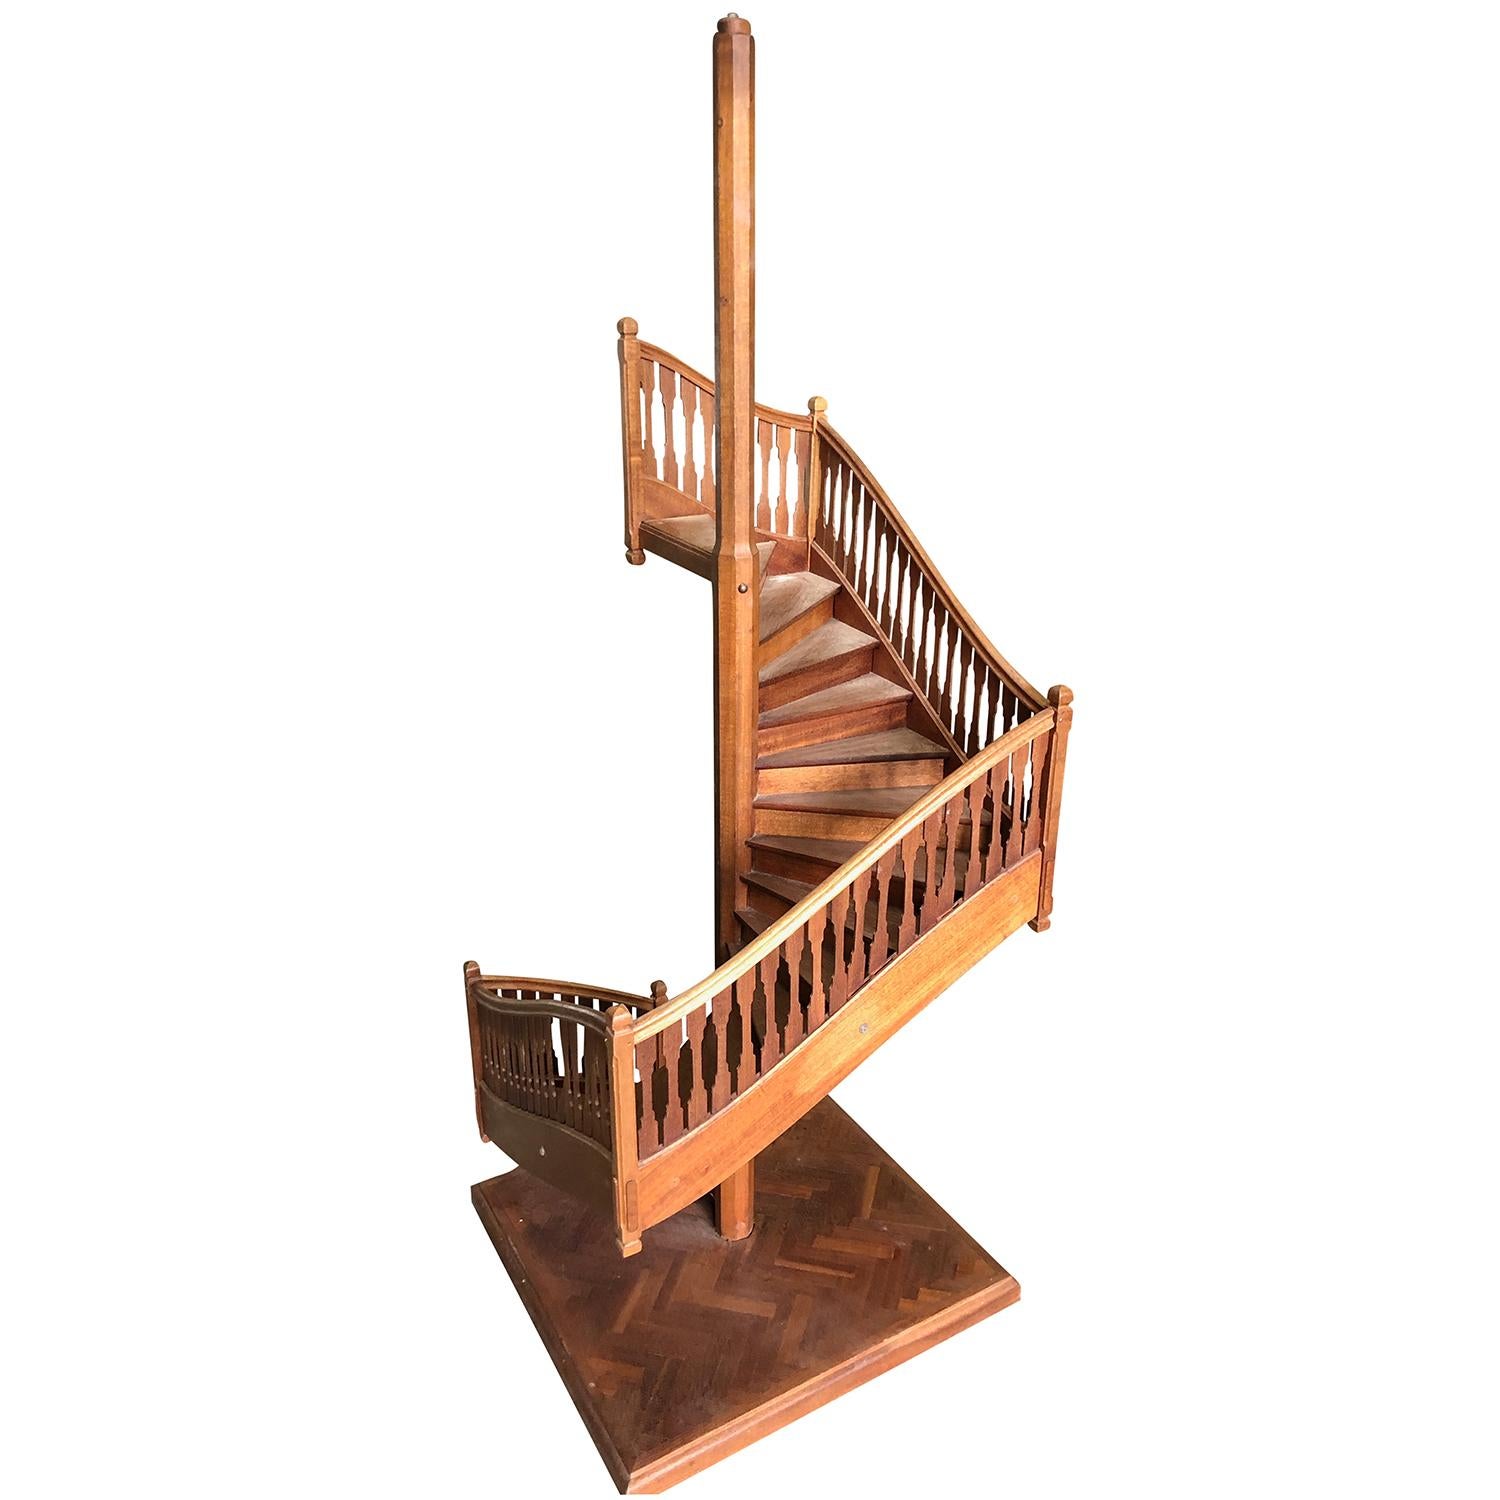 A brown, antique walnut spiral staircase decor with Classic design with numerous steps and flat baluster supports on a square base, in a herringbone pattern, in good condition. Miniature staircase were produced by architects and furniture makers as